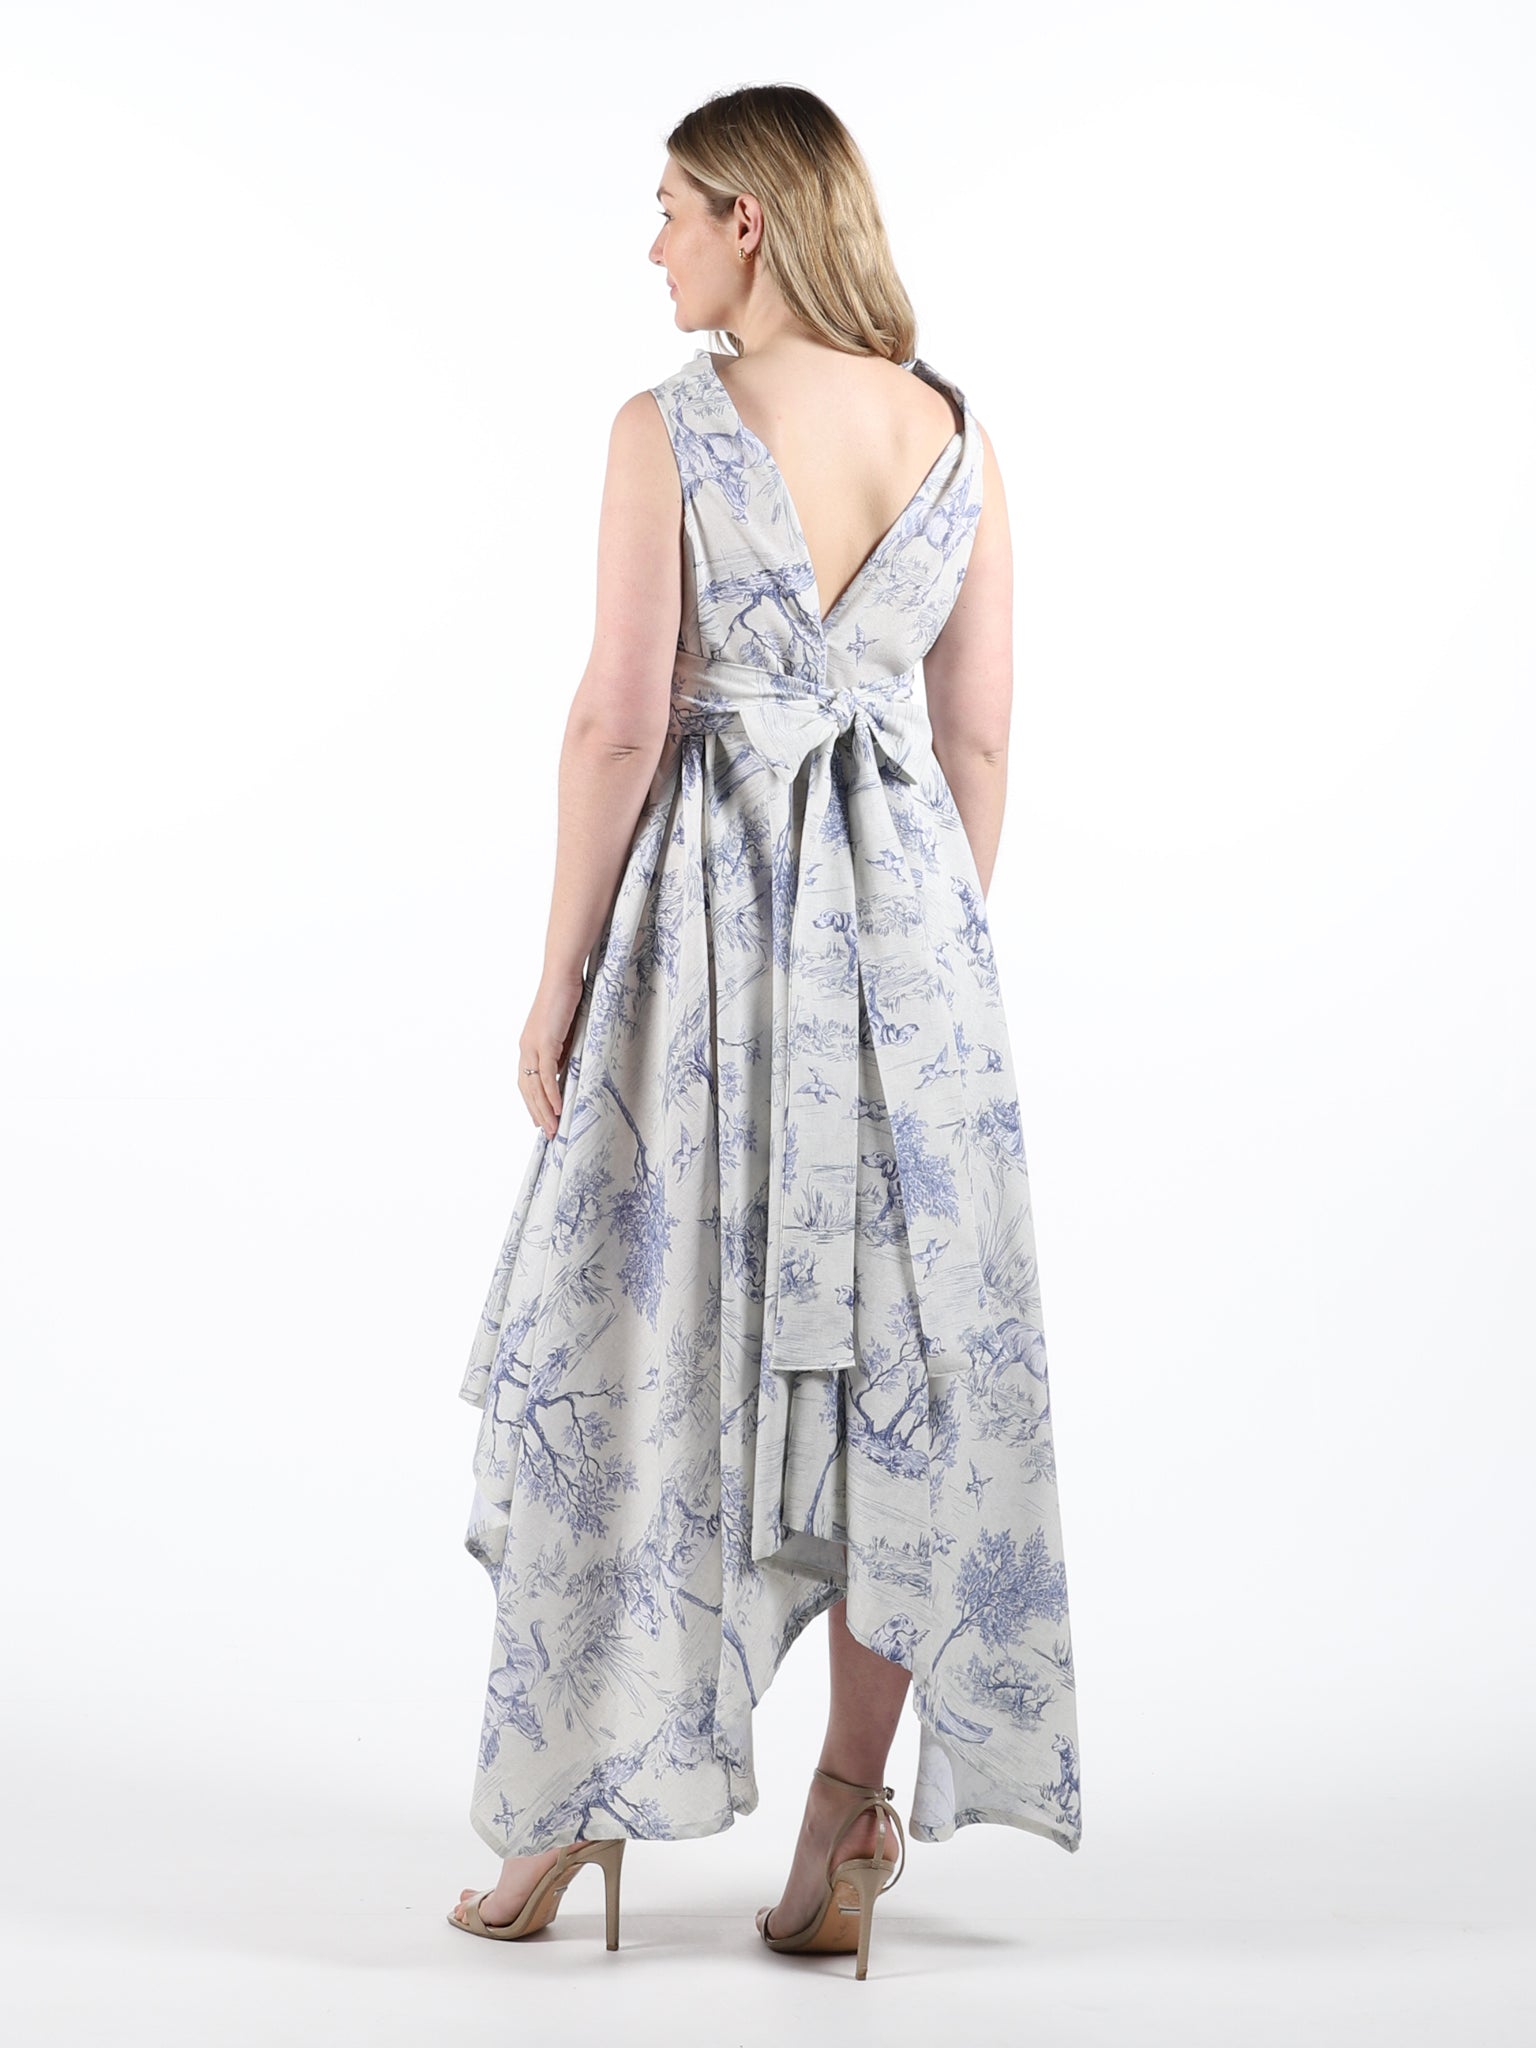 Blue Toile Print Darcy Dress (worn back to front)